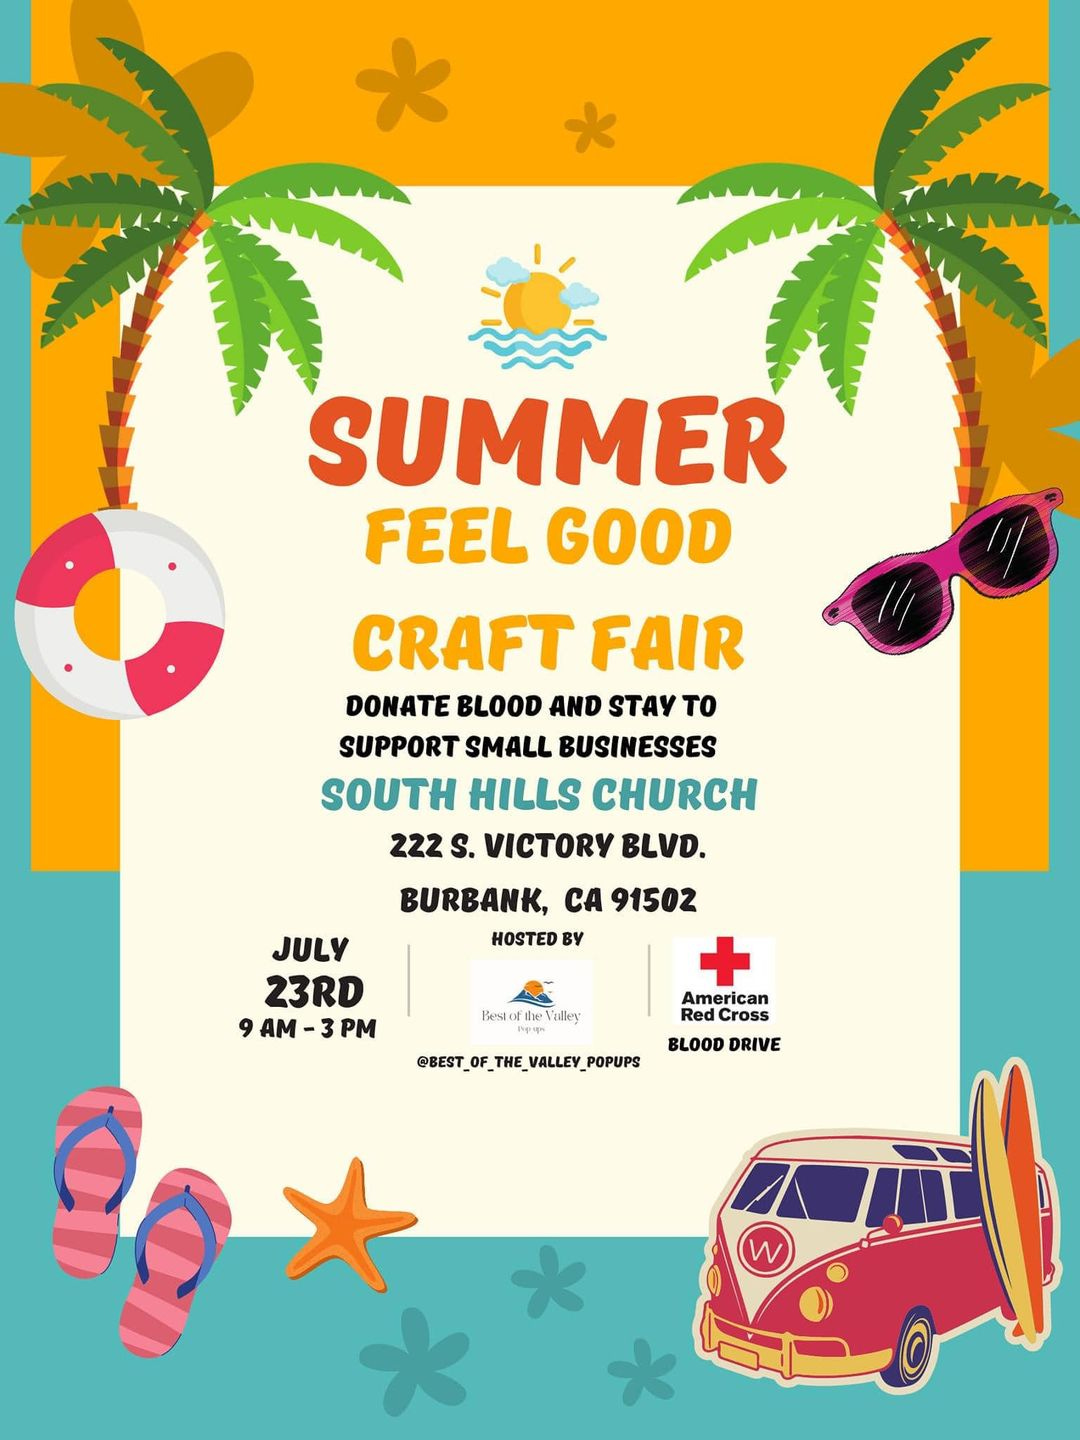 May be an image of text that says 'SUMMER FEEL GOOD CRAFT FAIR DONATE BLOOD AND STAY TO SUPPORT SMALL BUSINESSES SOUTH HILLS CHURCH 222 S. VICTORY BLVD. BURBANK, CA 91502 HOSTED BY JULY 23RD AM -3PM Bestol theV @BEST American Red Cross BLOOD DRIVE THE _VALLEY_ POPUPS'